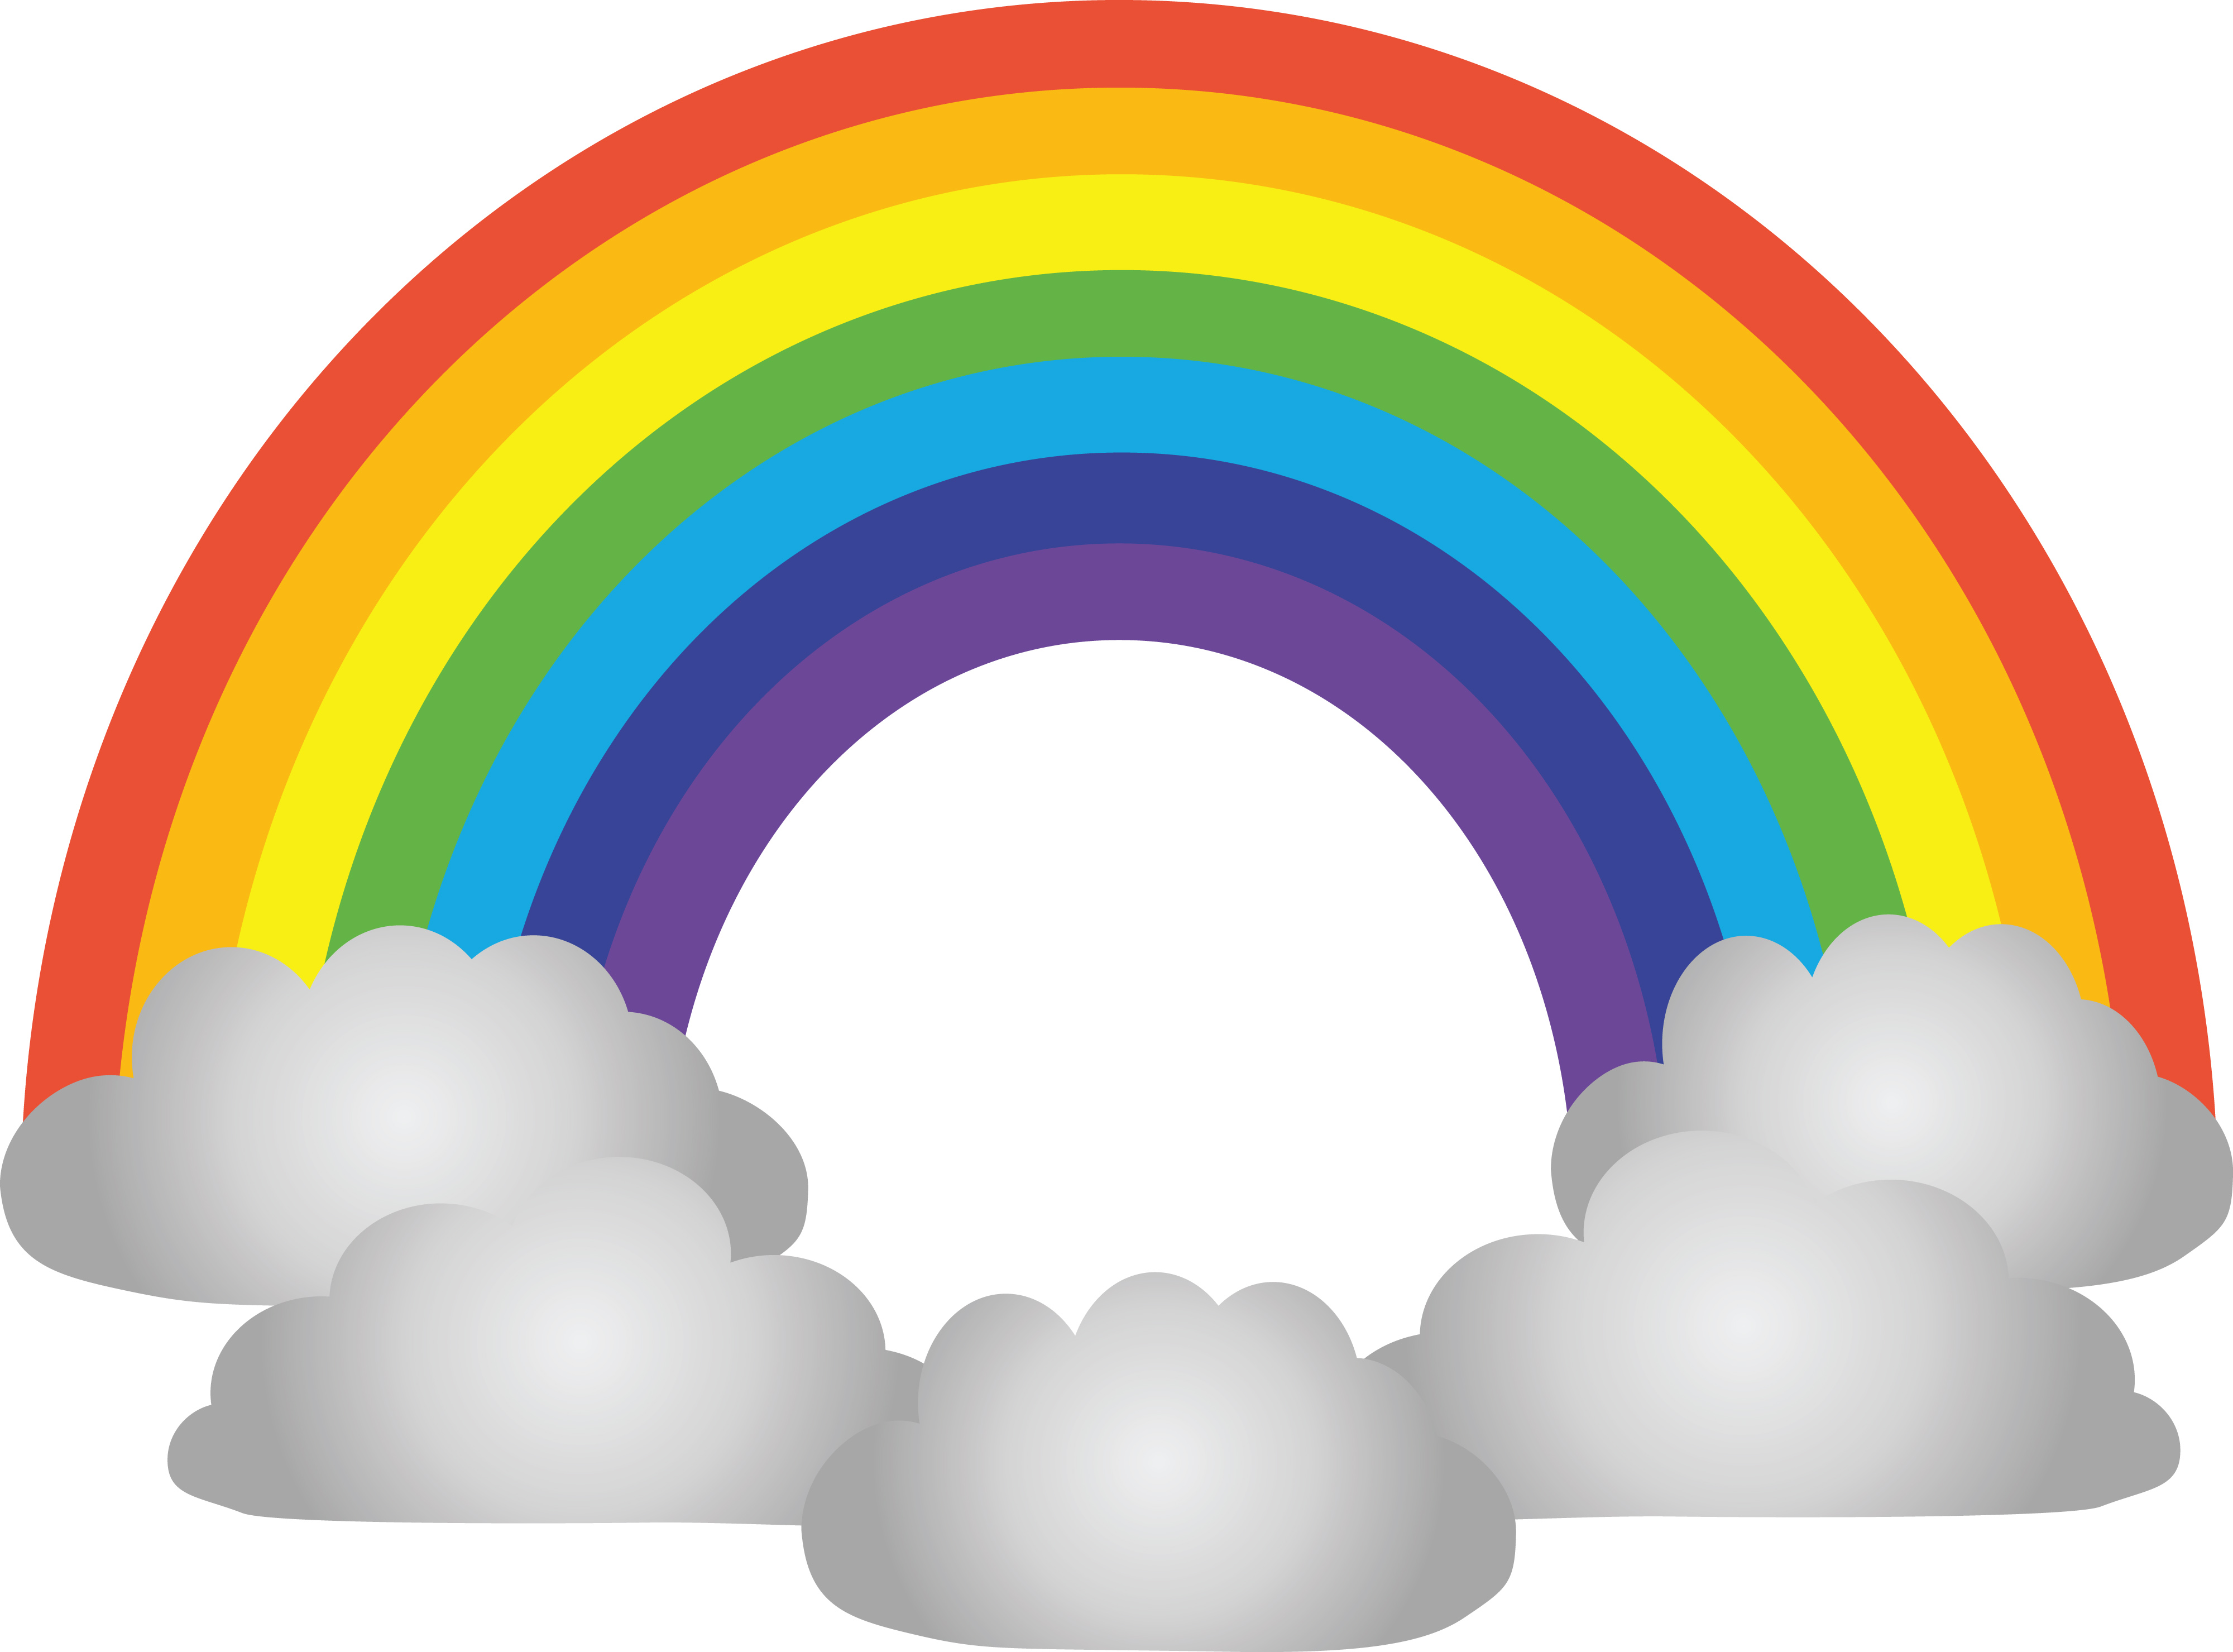 Rainbow With Clouds SVG File - Best Free Fonts | Befonts Gallatone